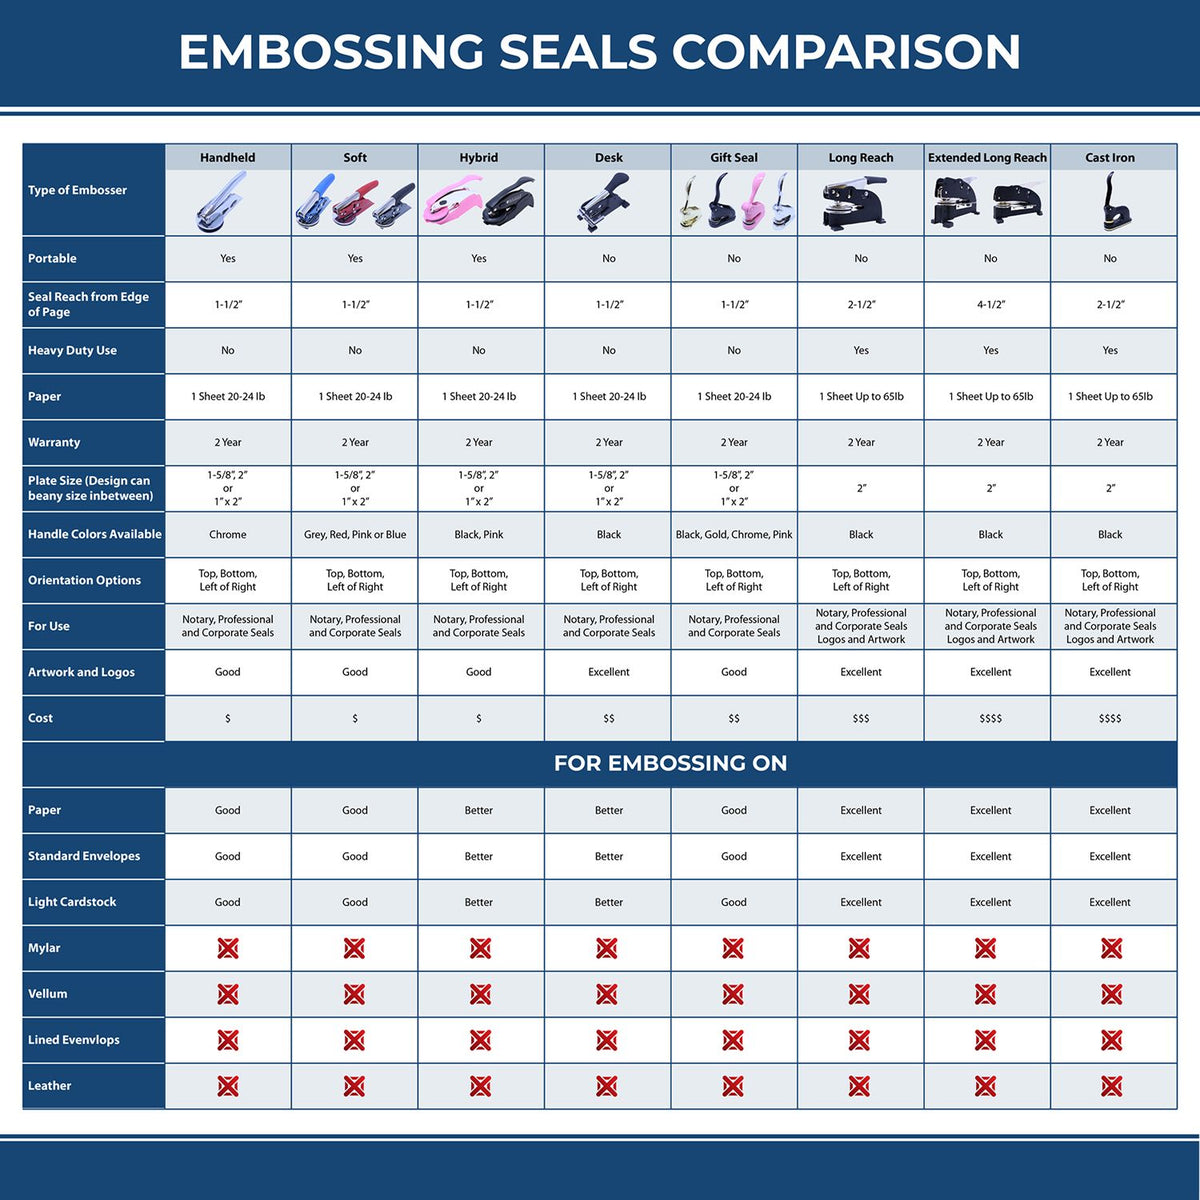 A comparison chart for the different types of mount models available for the Hybrid North Carolina Geologist Seal